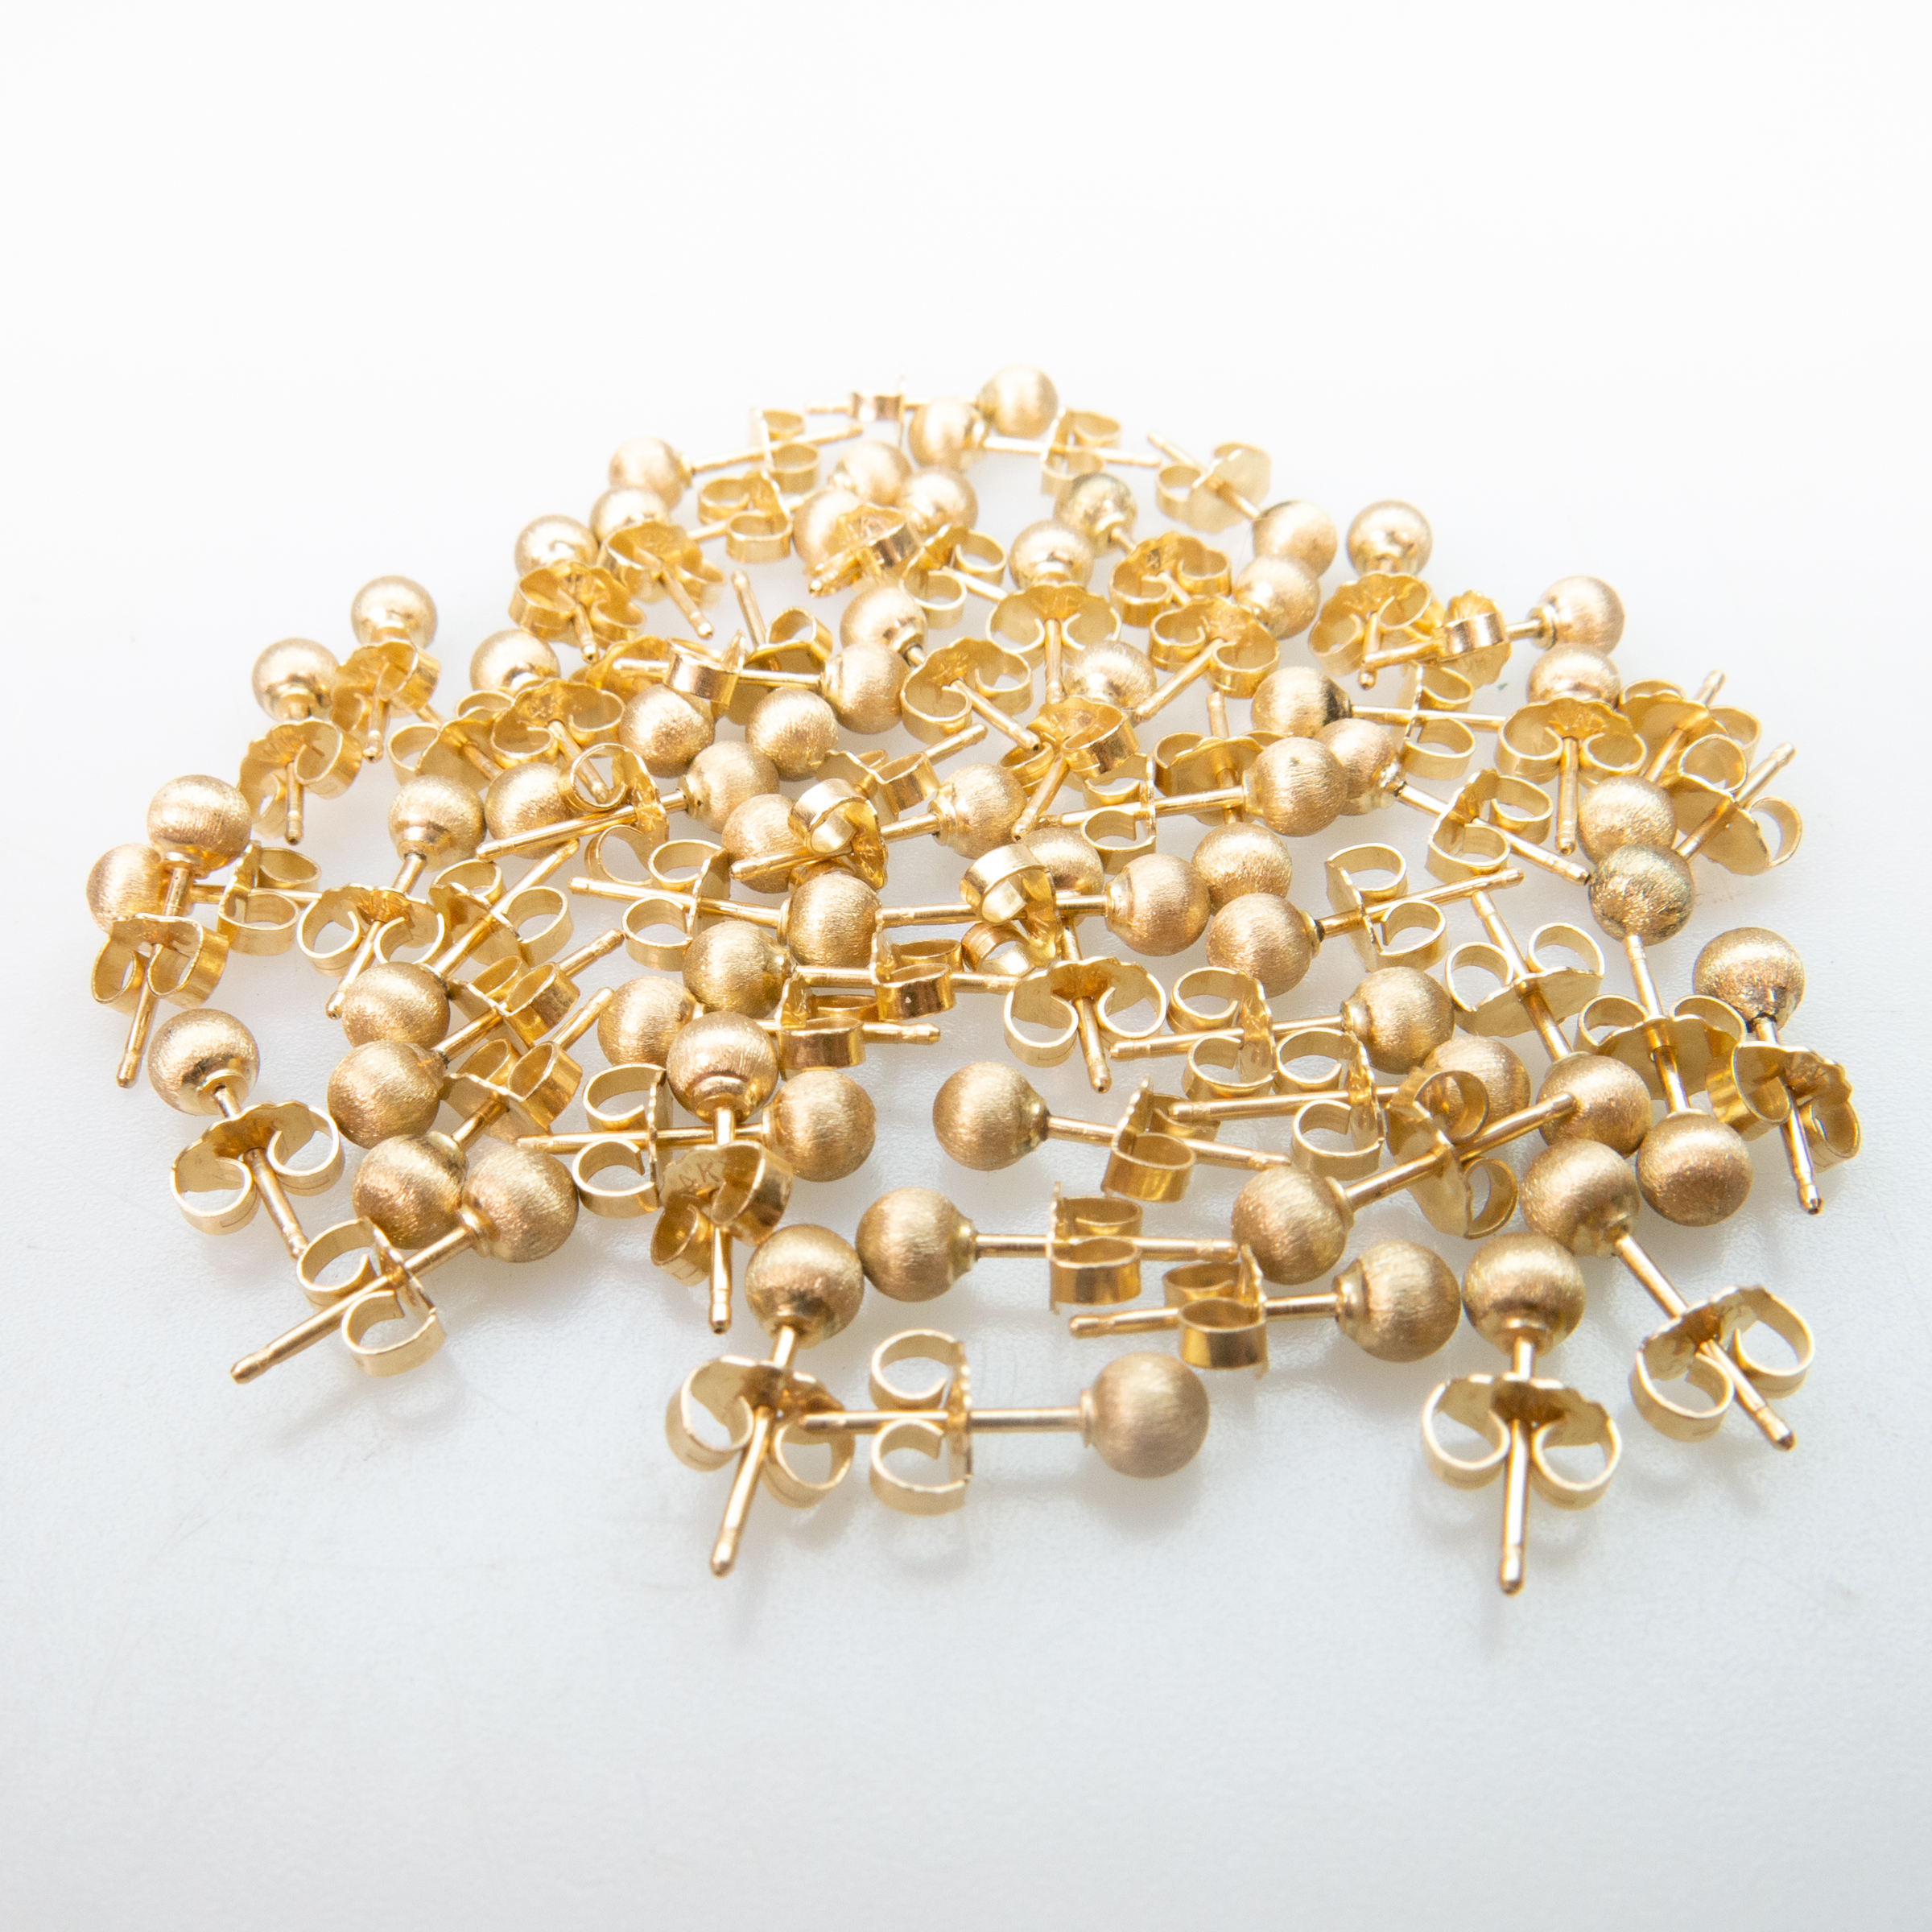 31 x Pairs Of 14k Yellow Gold Stud Earrings